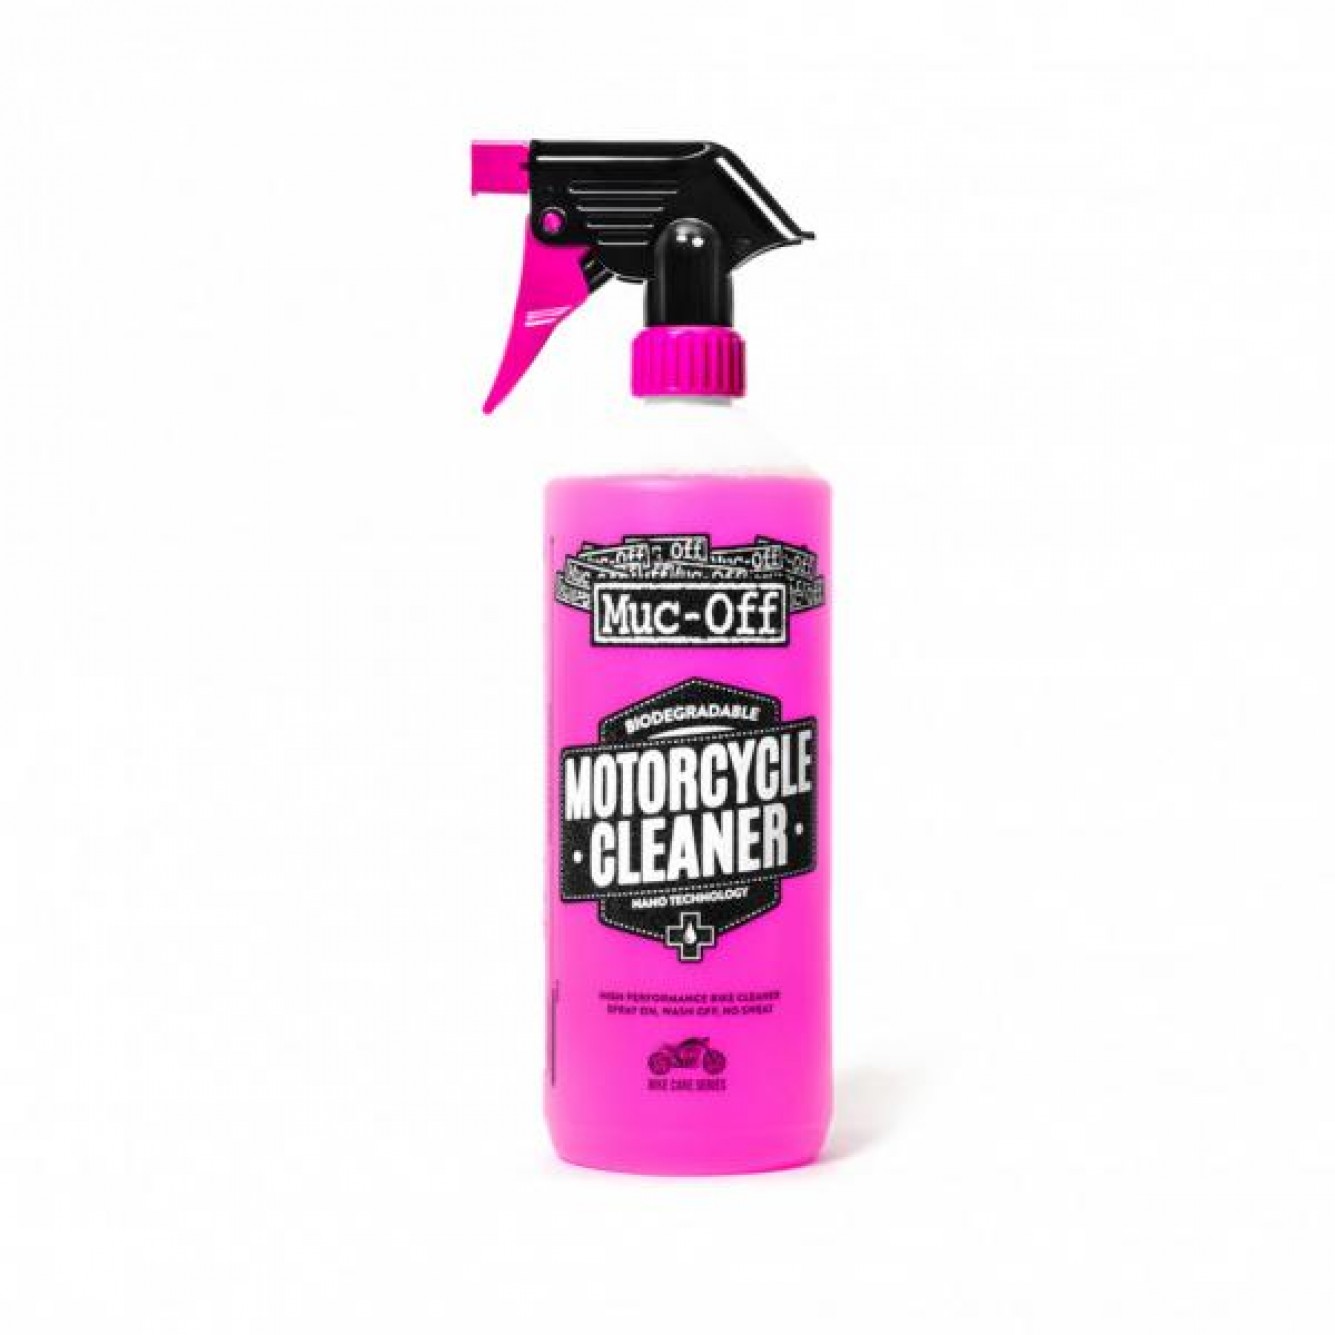 Muc-Off | Motorcycle Cleaner 1 ltr